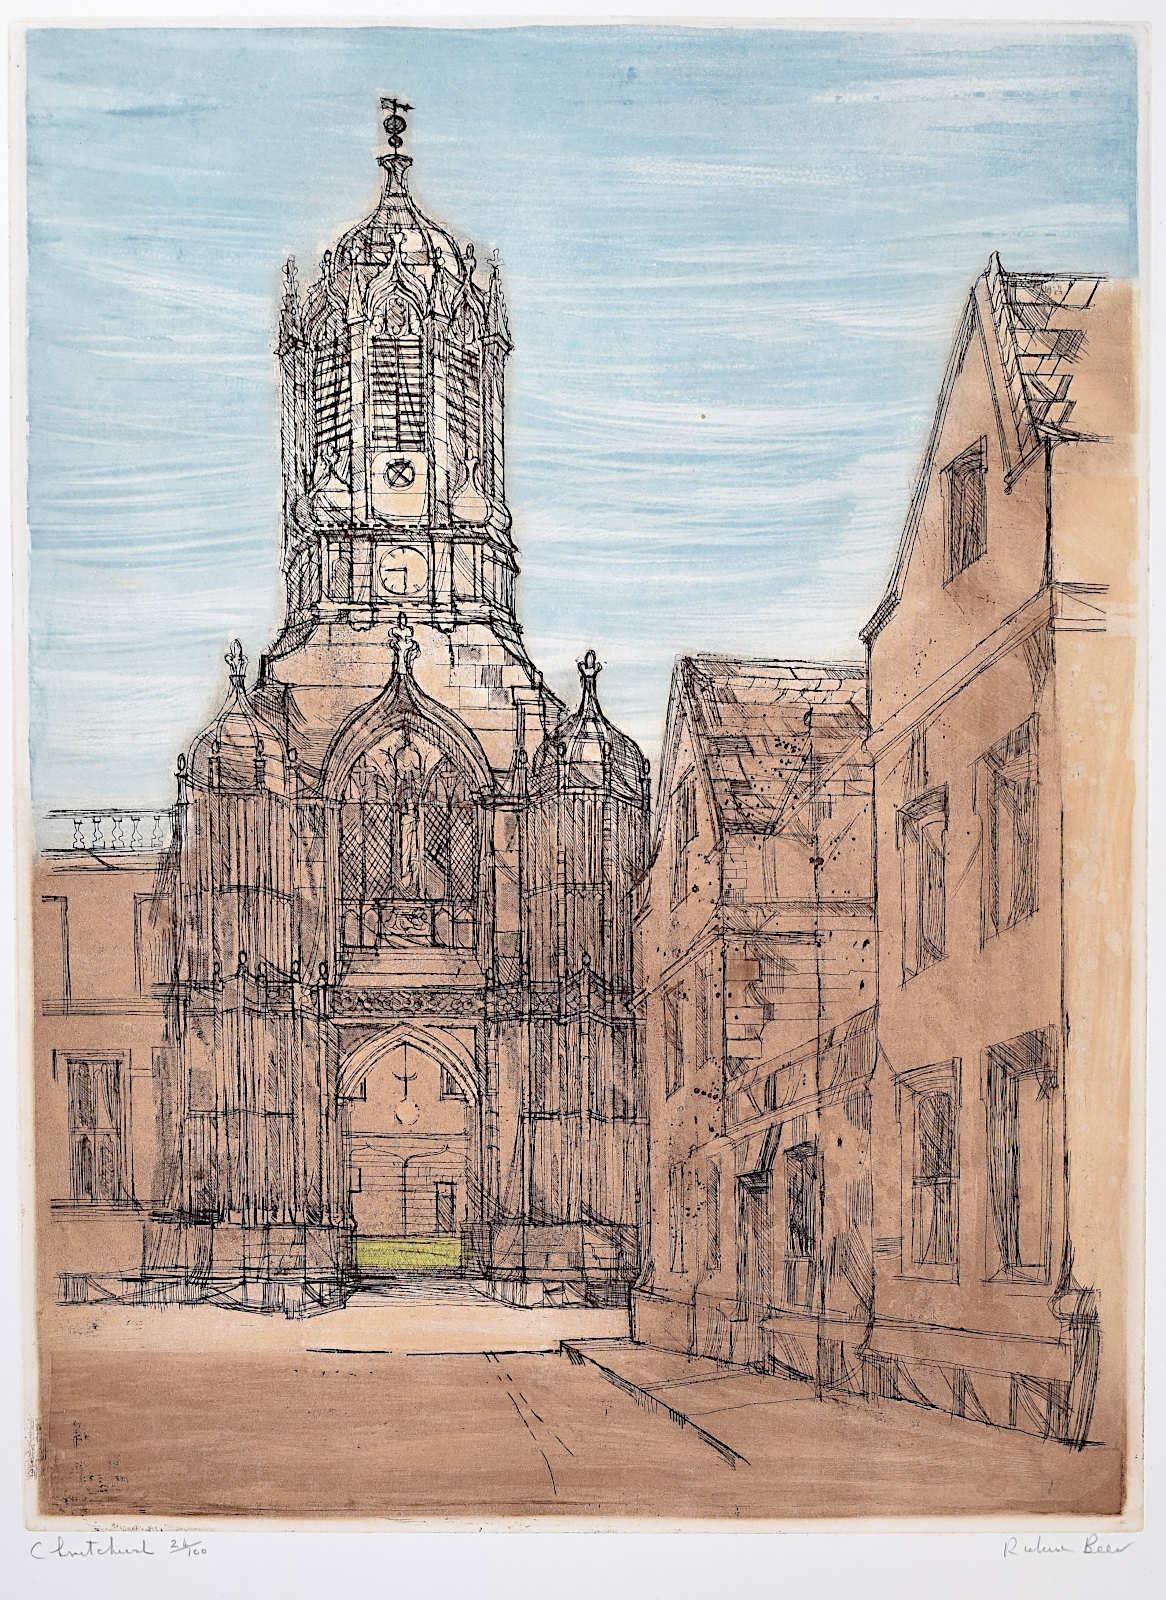 To see our other views of Oxford and Cambridge, or Modern British Art, scroll down to "More from this Seller" and below it click on "See all from this Seller" - or send us a message if you cannot find the artist you want.

Richard Beer (1928 -